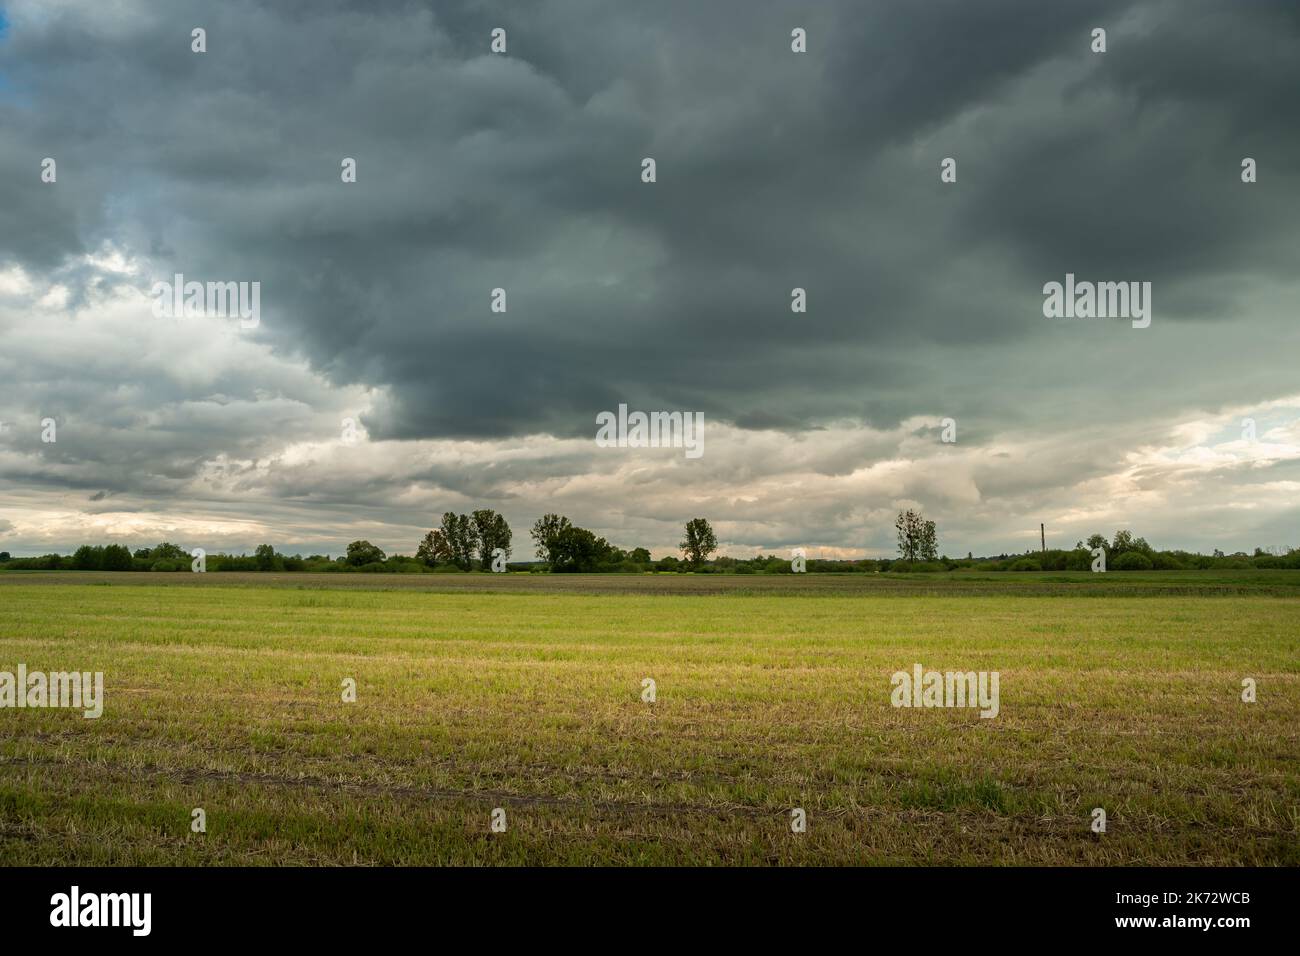 A stubble field and rainy clouds on the sky Stock Photo